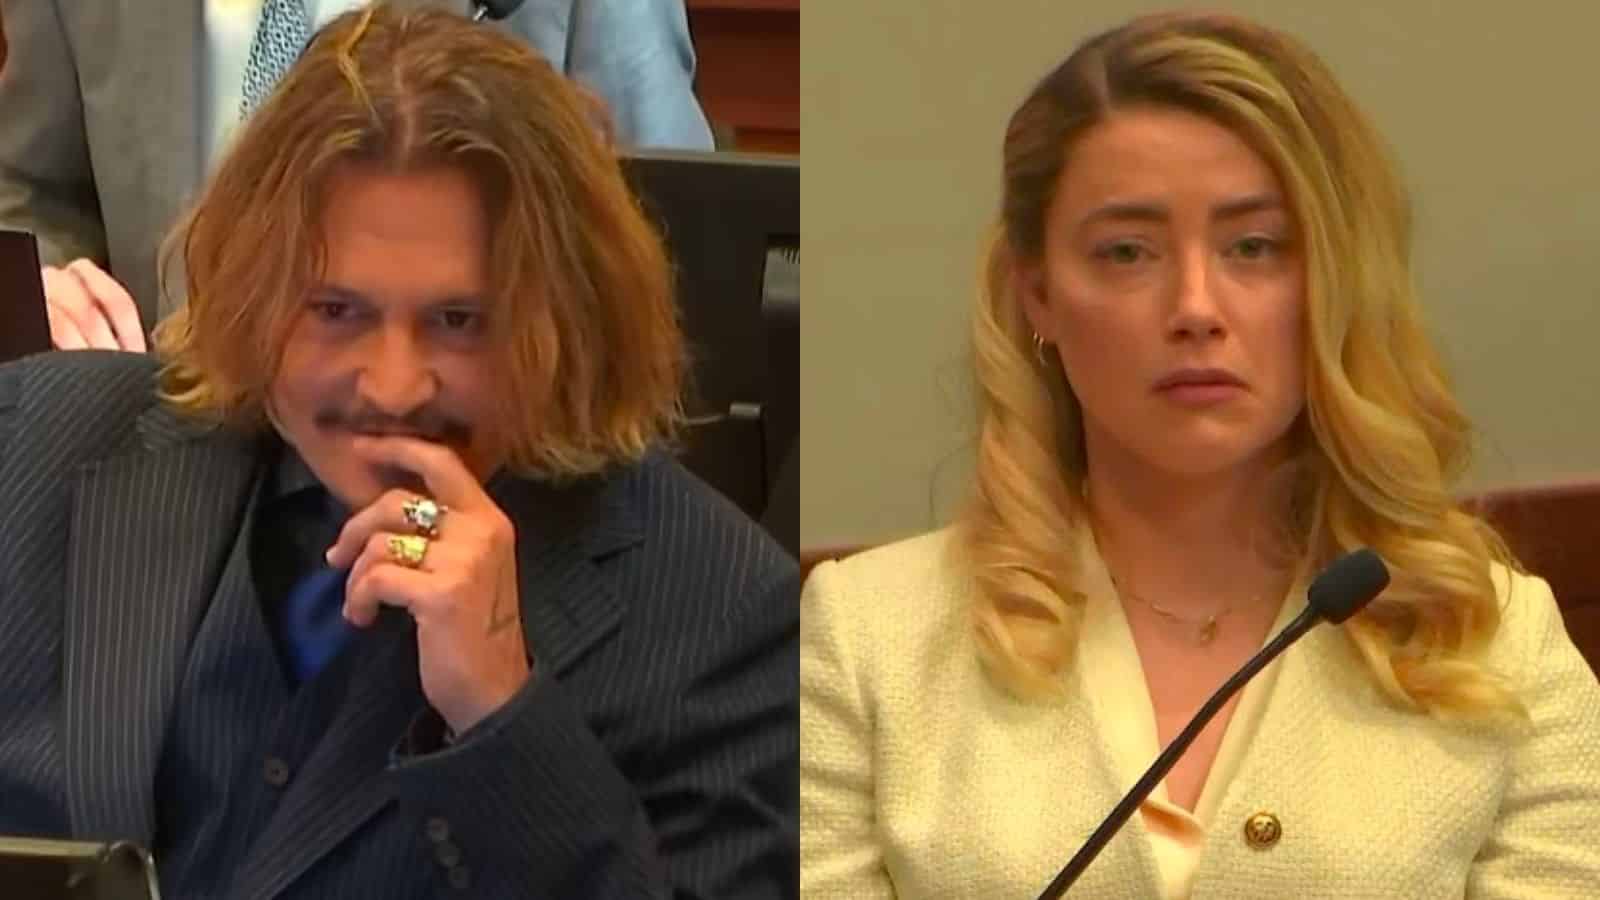 Johnny Depp and Amber Heard during famous court hearing